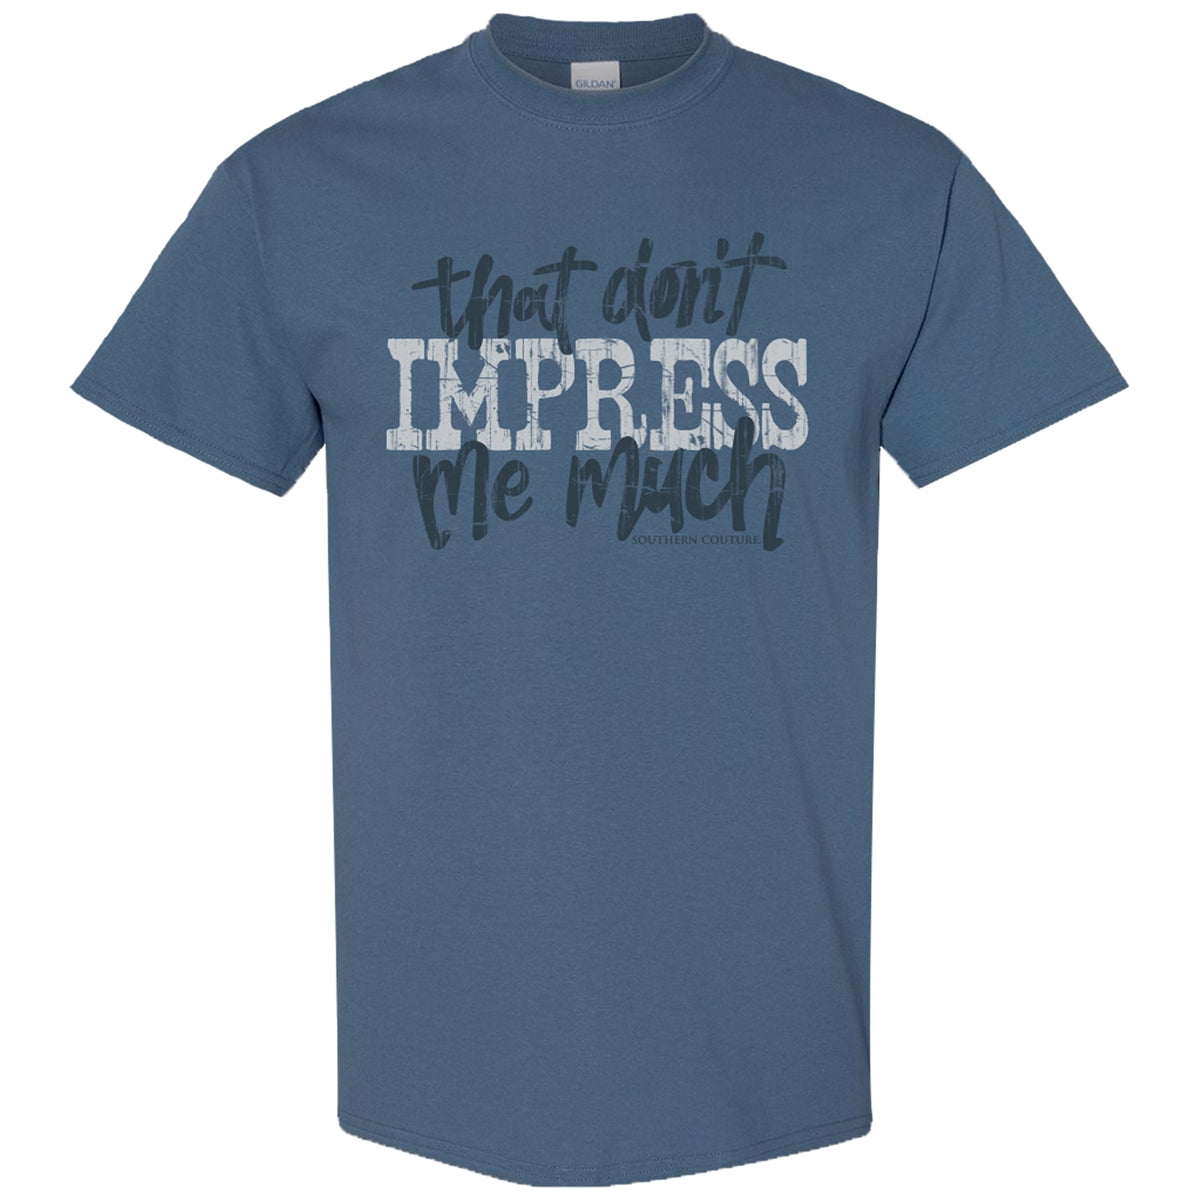 Southern Couture Don't Impress Me Much Soft T-Shirt